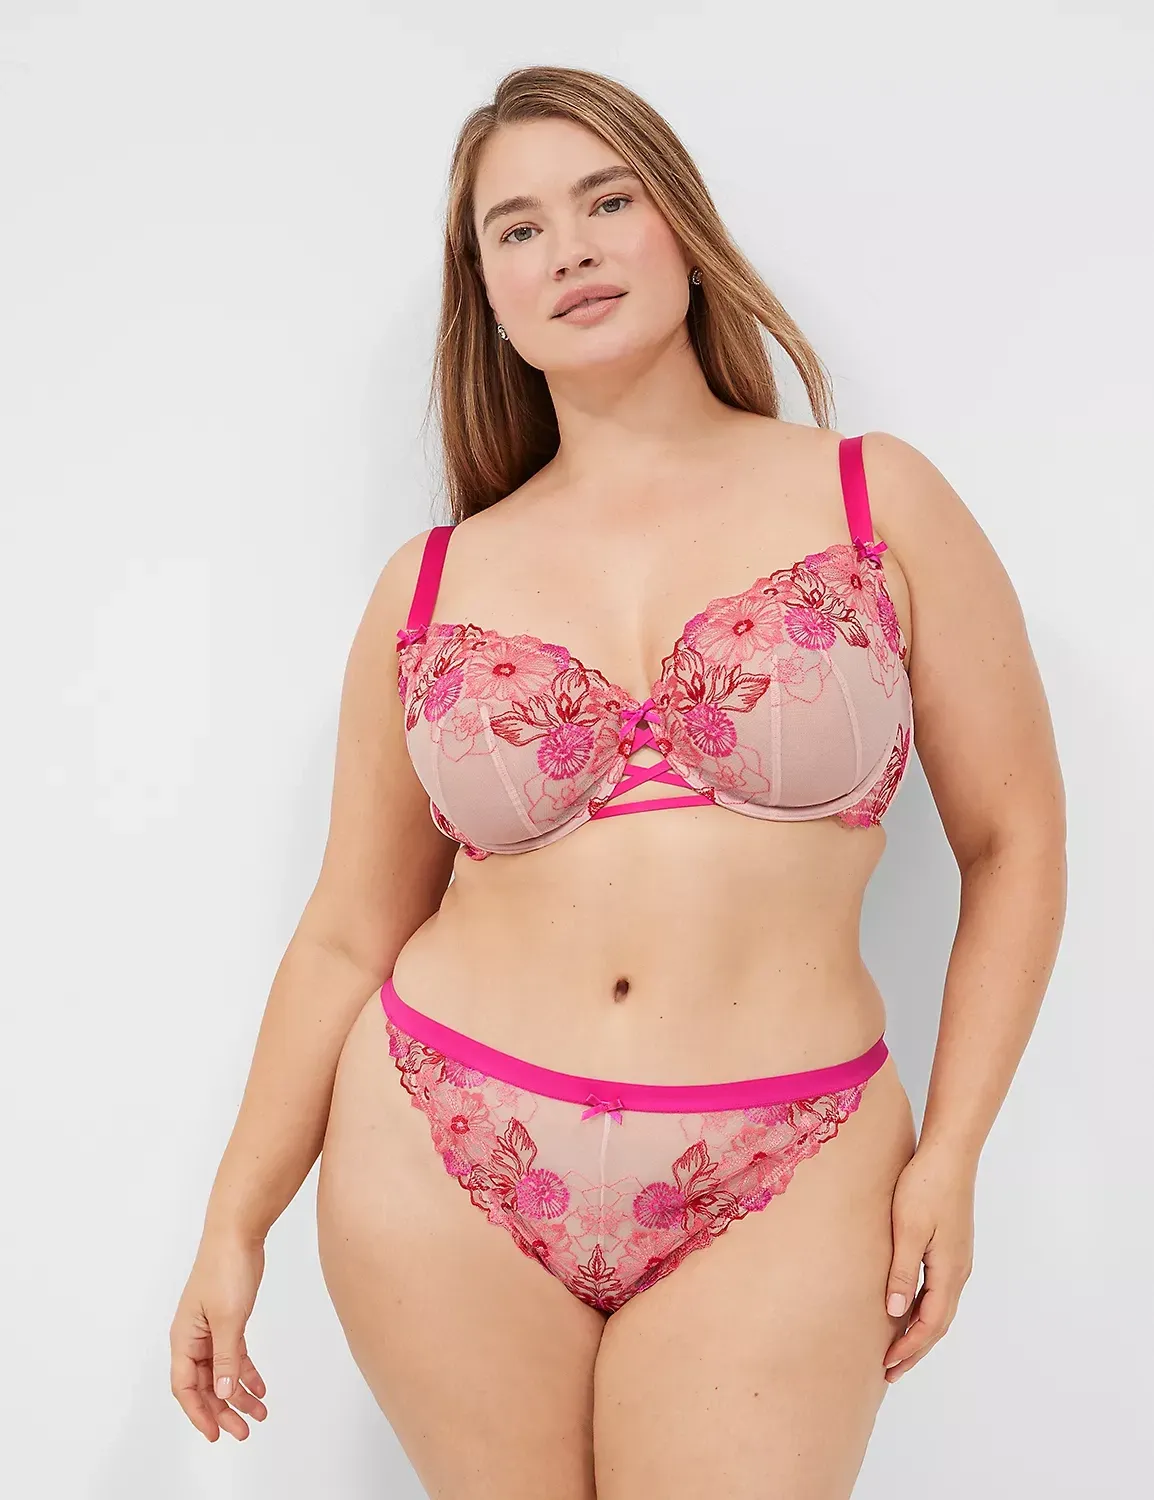 The Best Plus-Size Lingerie Starting At Size 24 - xoNecole